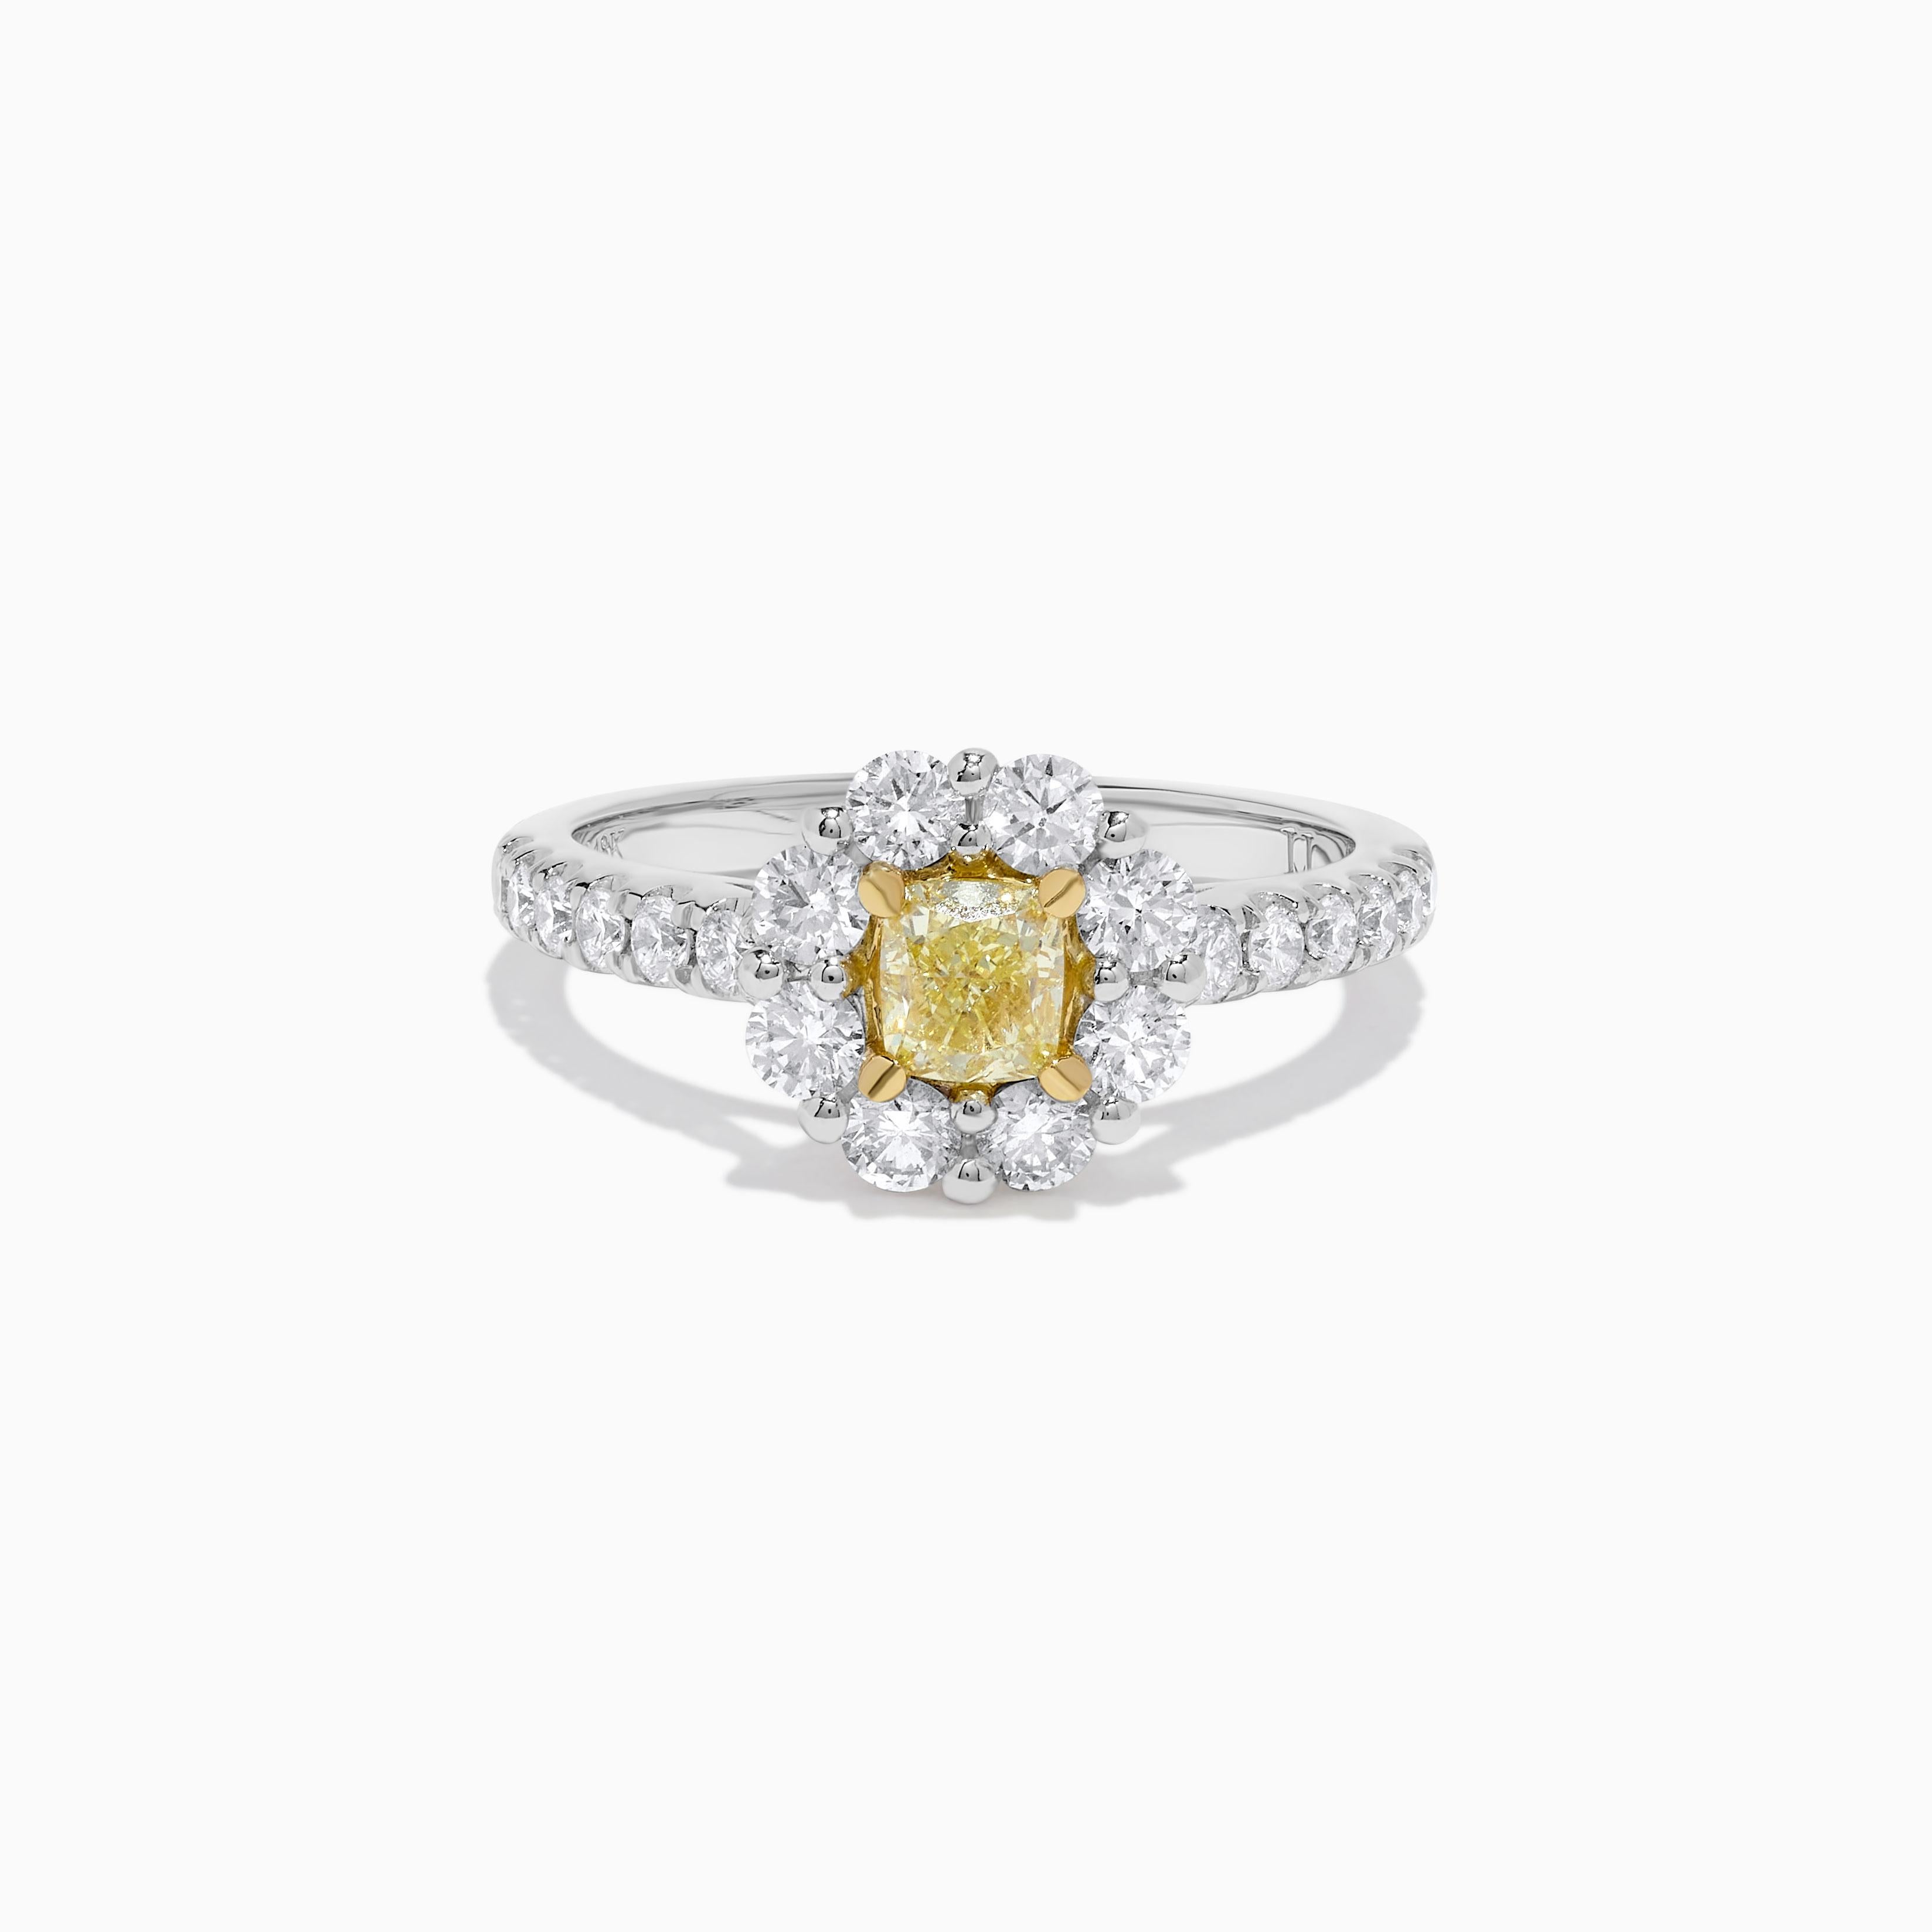 RareGemWorld's classic diamond ring. Mounted in a beautiful Platinum and 18K Gold setting with a natural cushion cut yellow diamond. The yellow diamond is surrounded by round natural white diamond melee. This ring is guaranteed to impress and